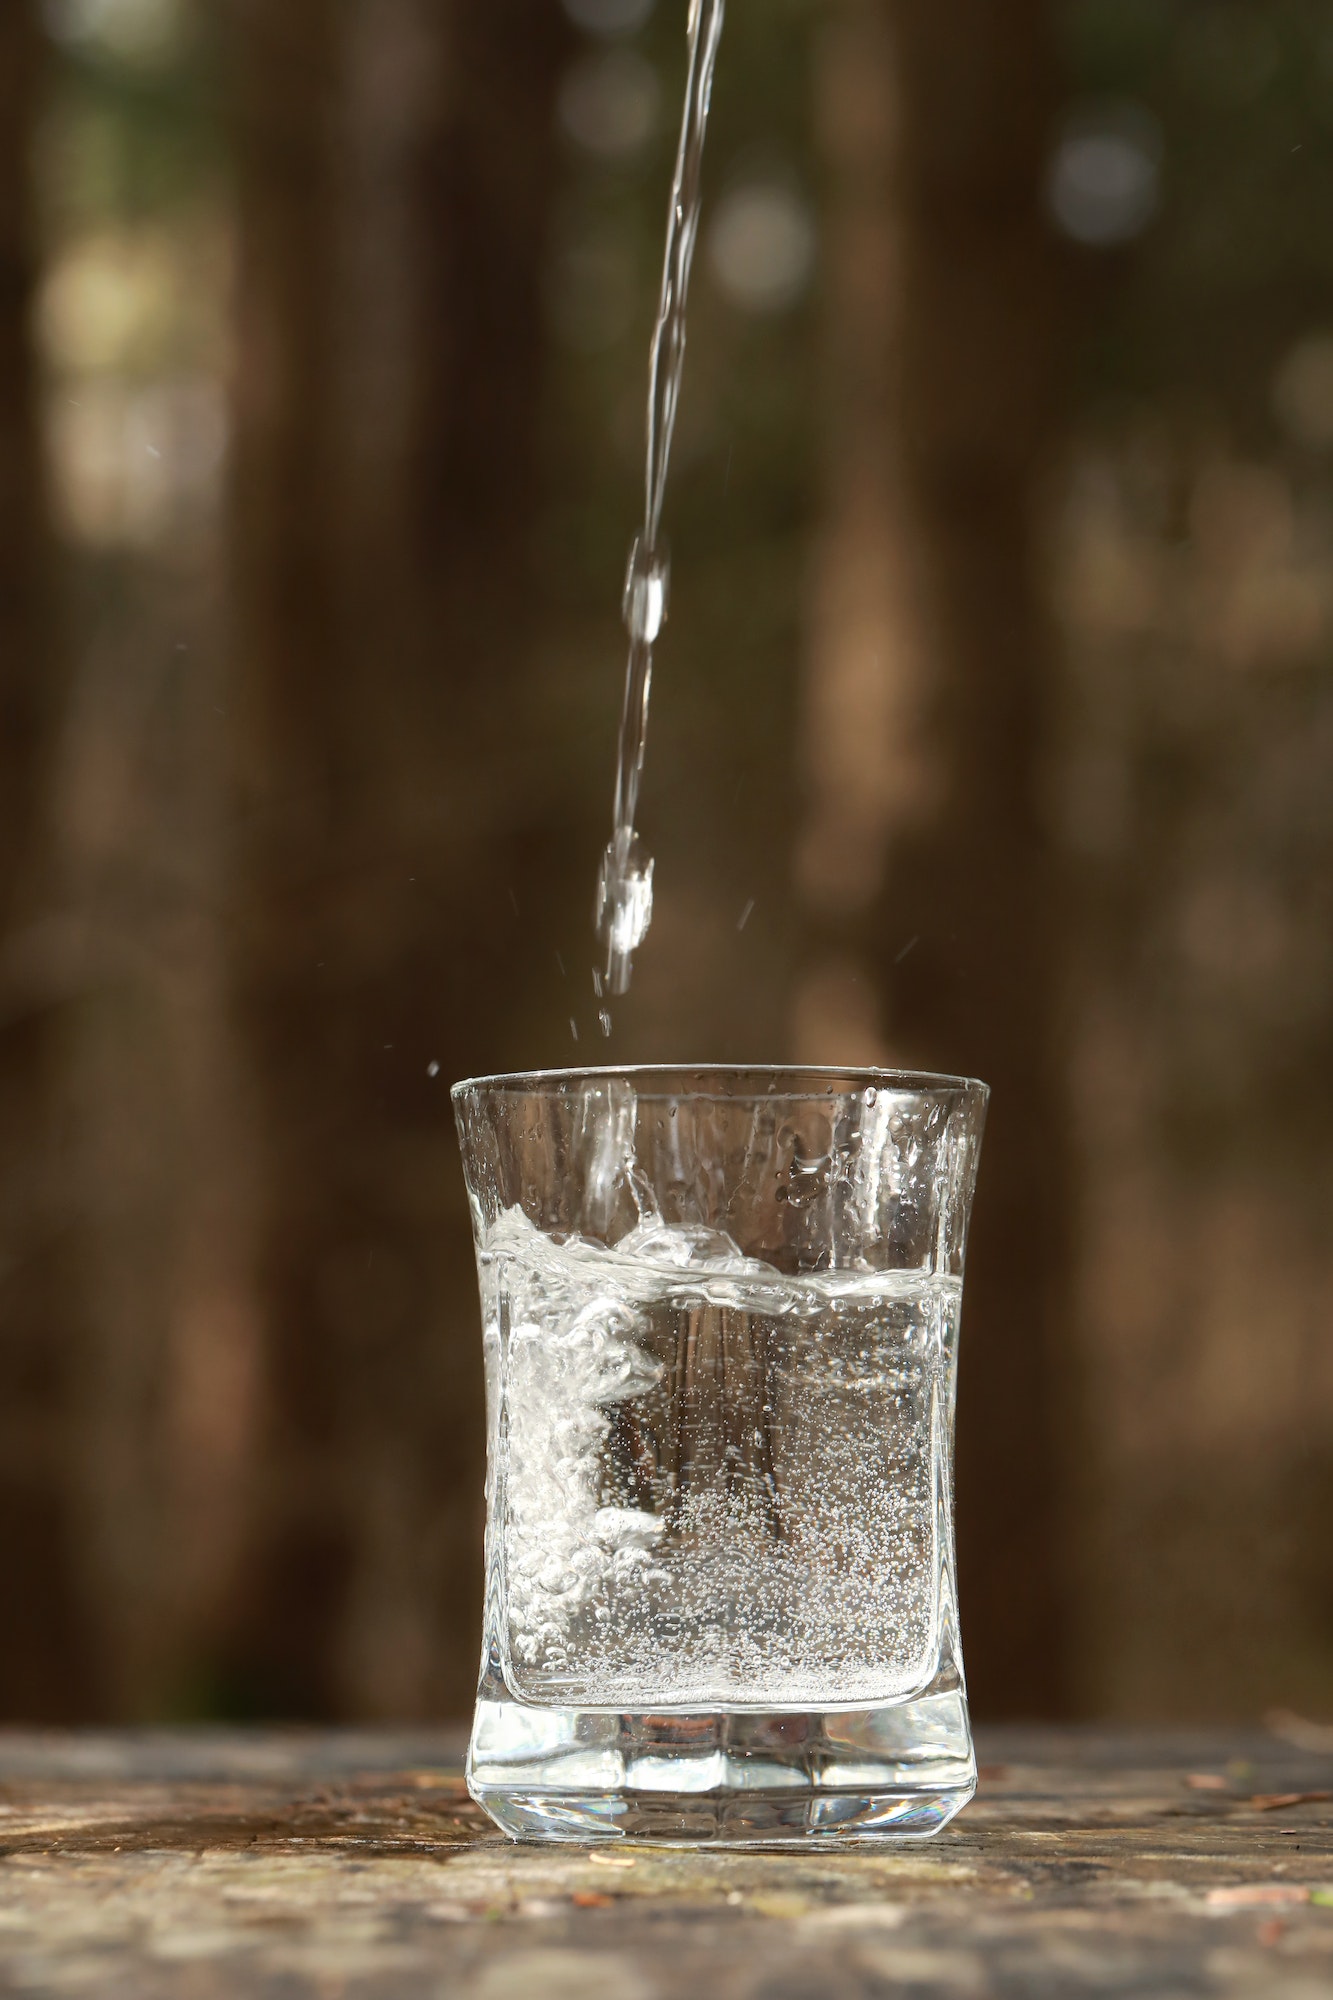 Water is poured into a transparent glass in nature.